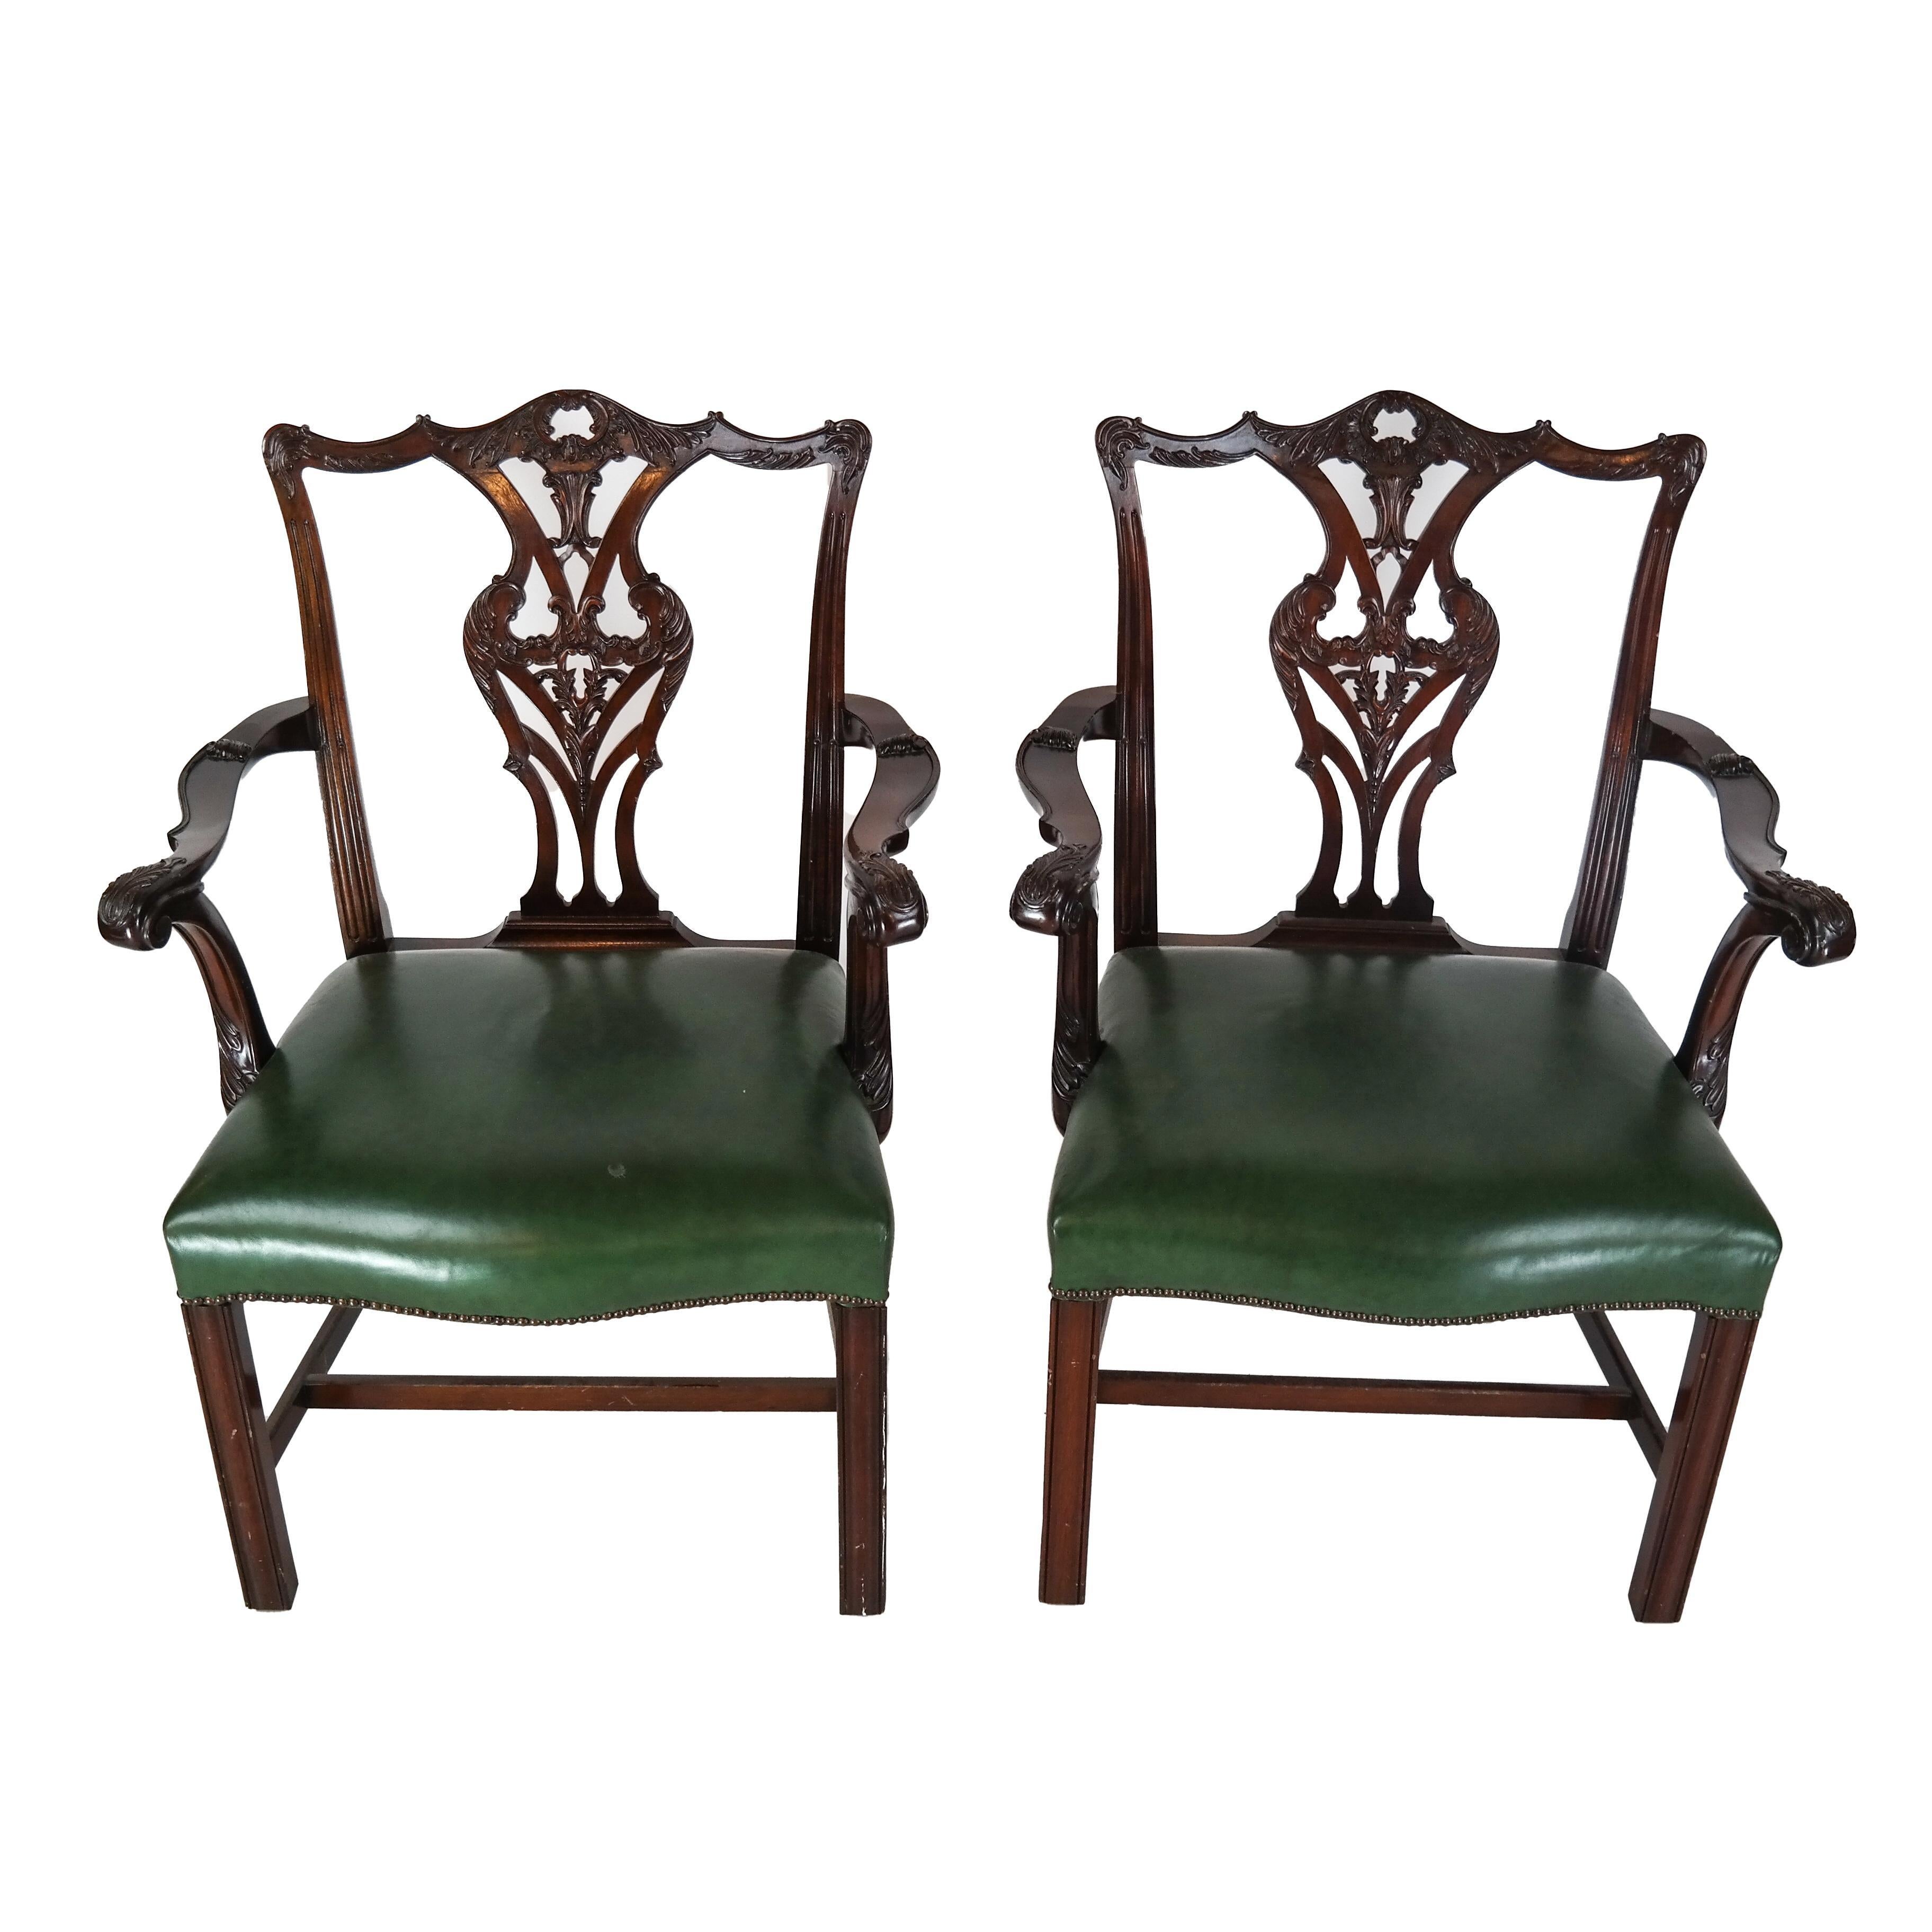 Pair of Regency mahogany arm chairs with green leather seats